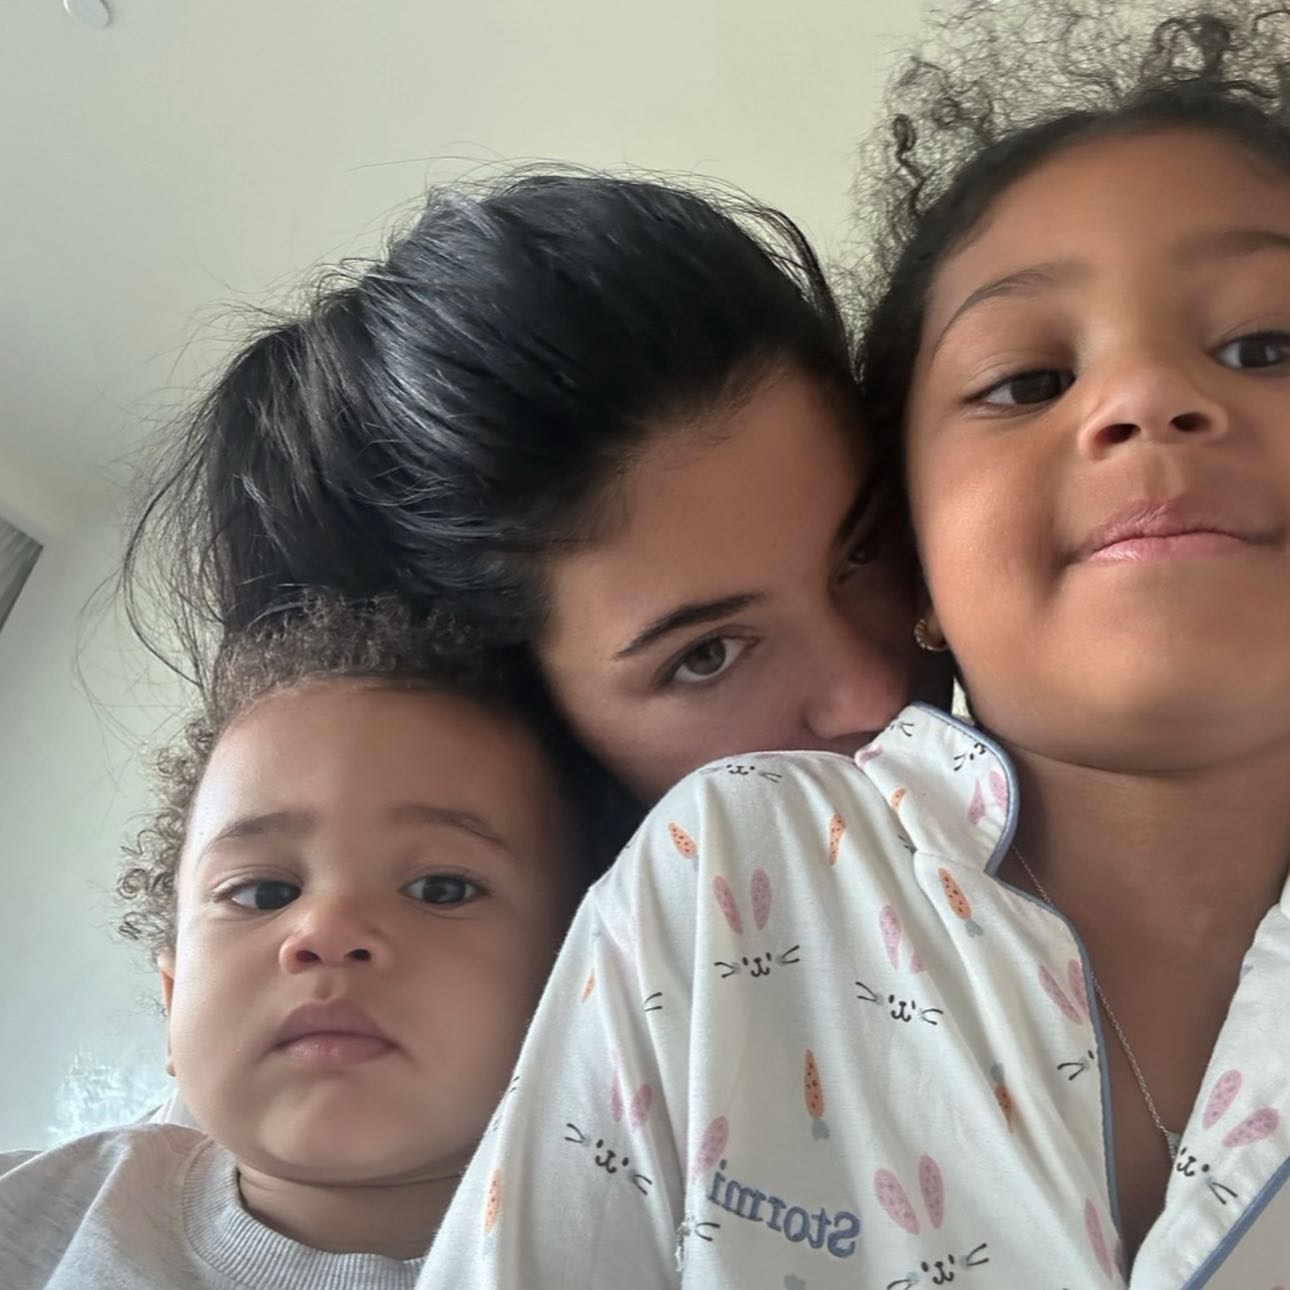 Kylie took a photo with of son Aire and daughter Stormi